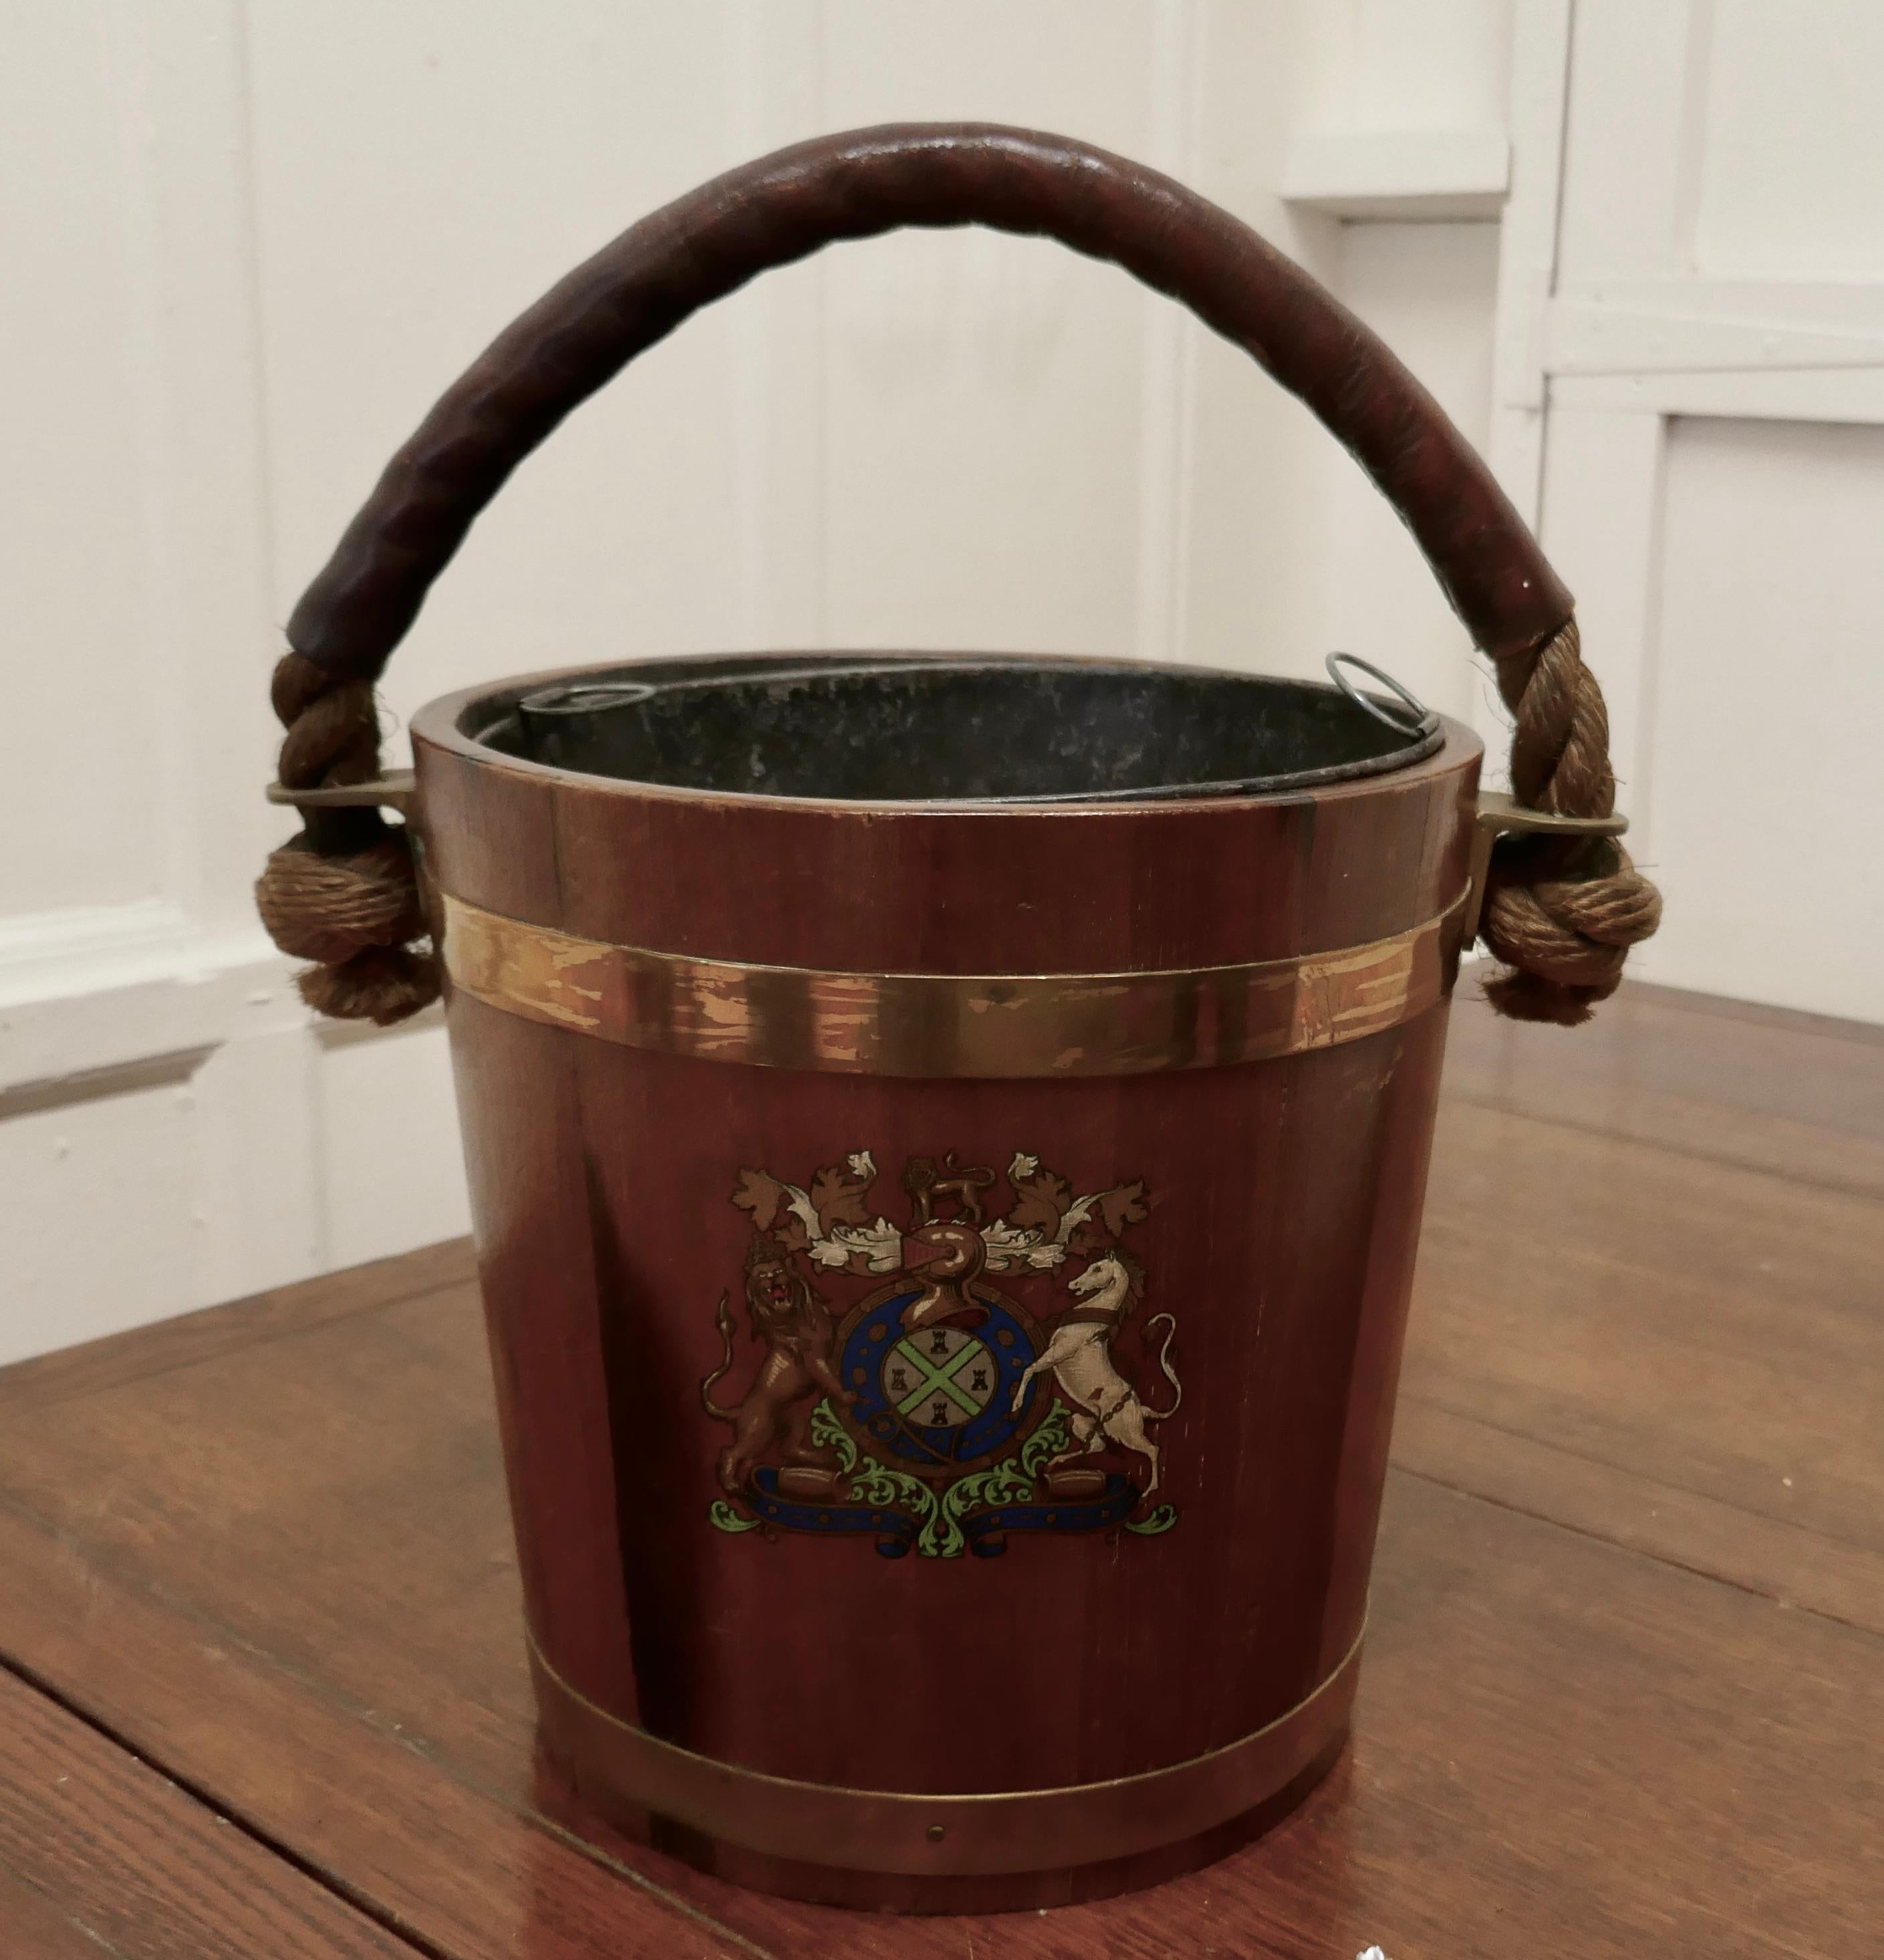 19th Century Royal Navy Oak Fire Bucket, with Plymouth Armorial Crest 

This is a superb looking piece made in Oak and decorated with the Plymouth Armorial Crest, it was used as a water carrier but now has the addition of a lift out metal liner so